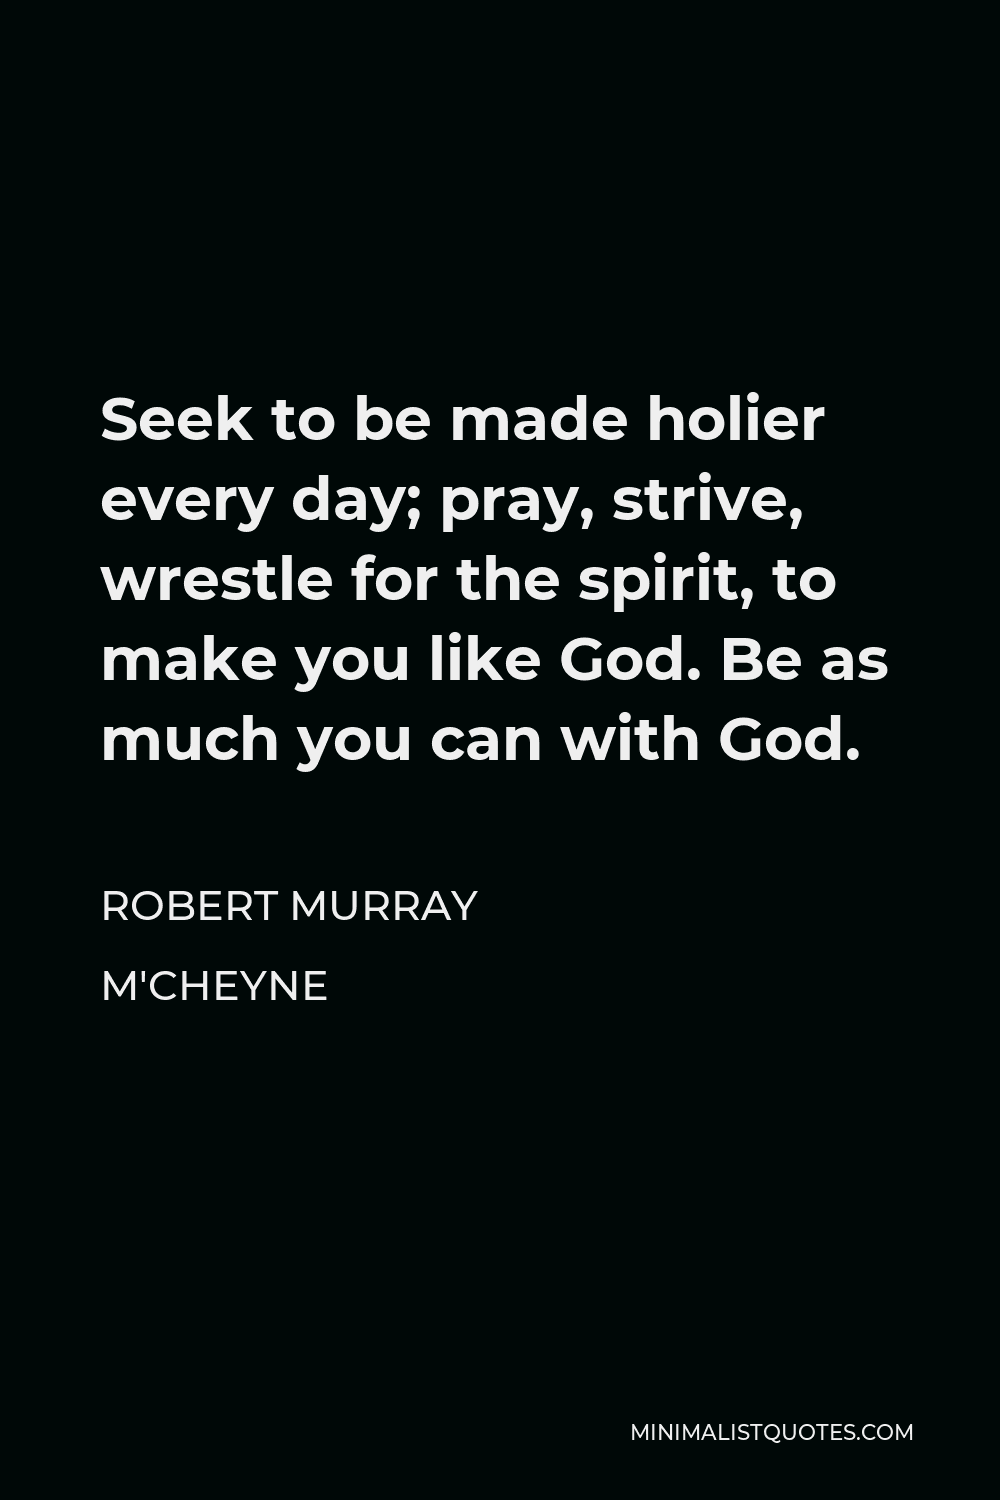 Robert Murray M'Cheyne Quote - Seek to be made holier every day; pray, strive, wrestle for the spirit, to make you like God. Be as much you can with God.